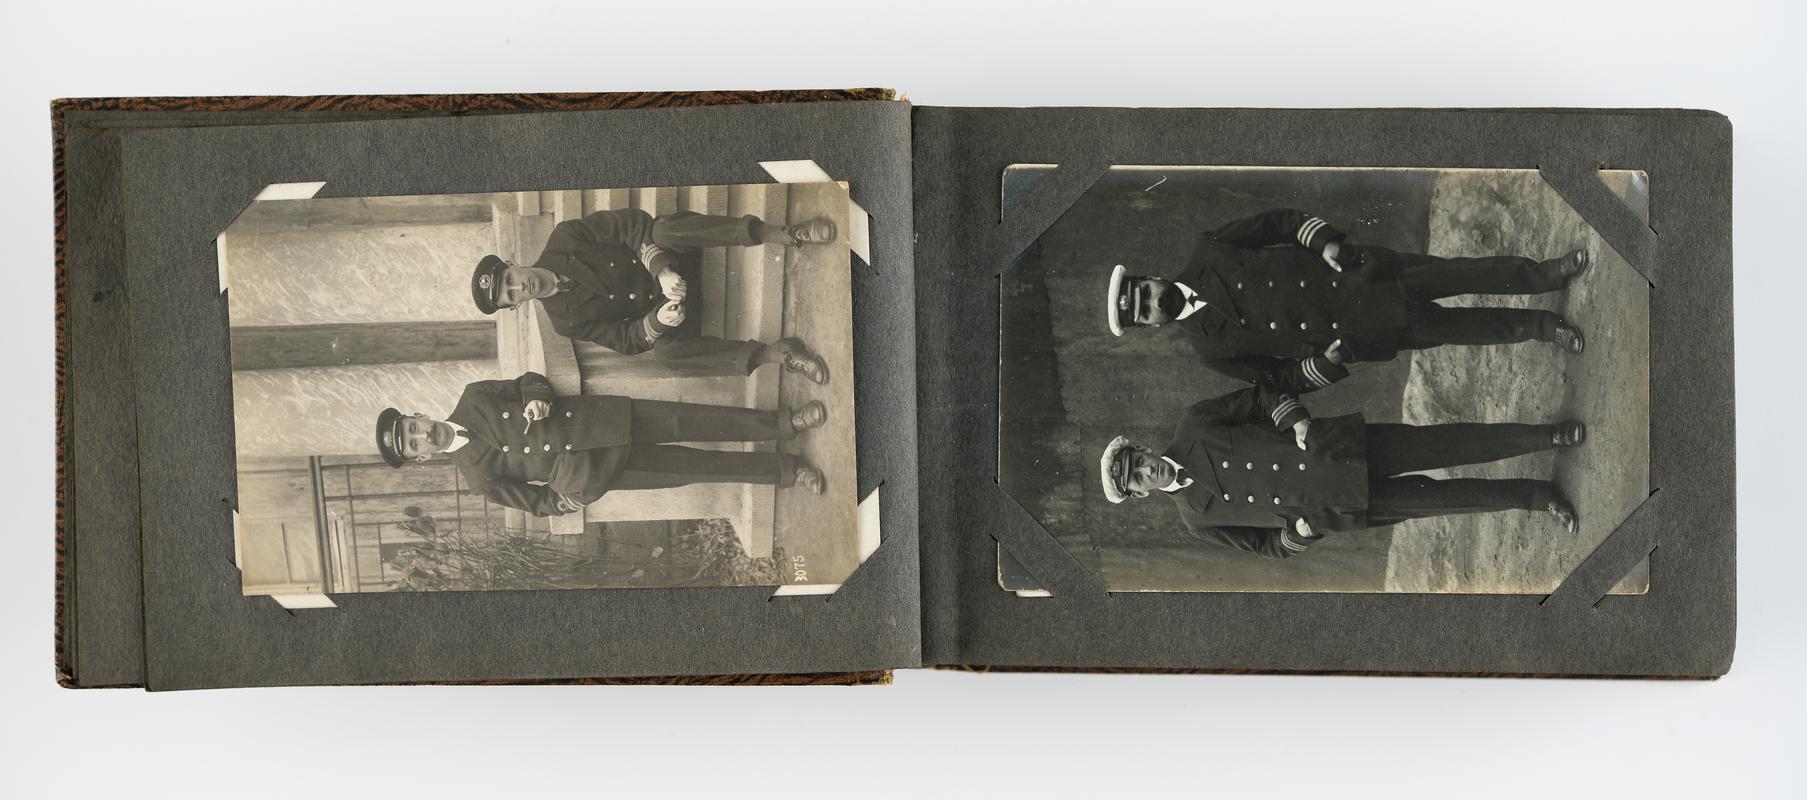 Photograph album relating to the internment of Capt. A. Starkey of the S.S. 'Torrington' during the First World War.